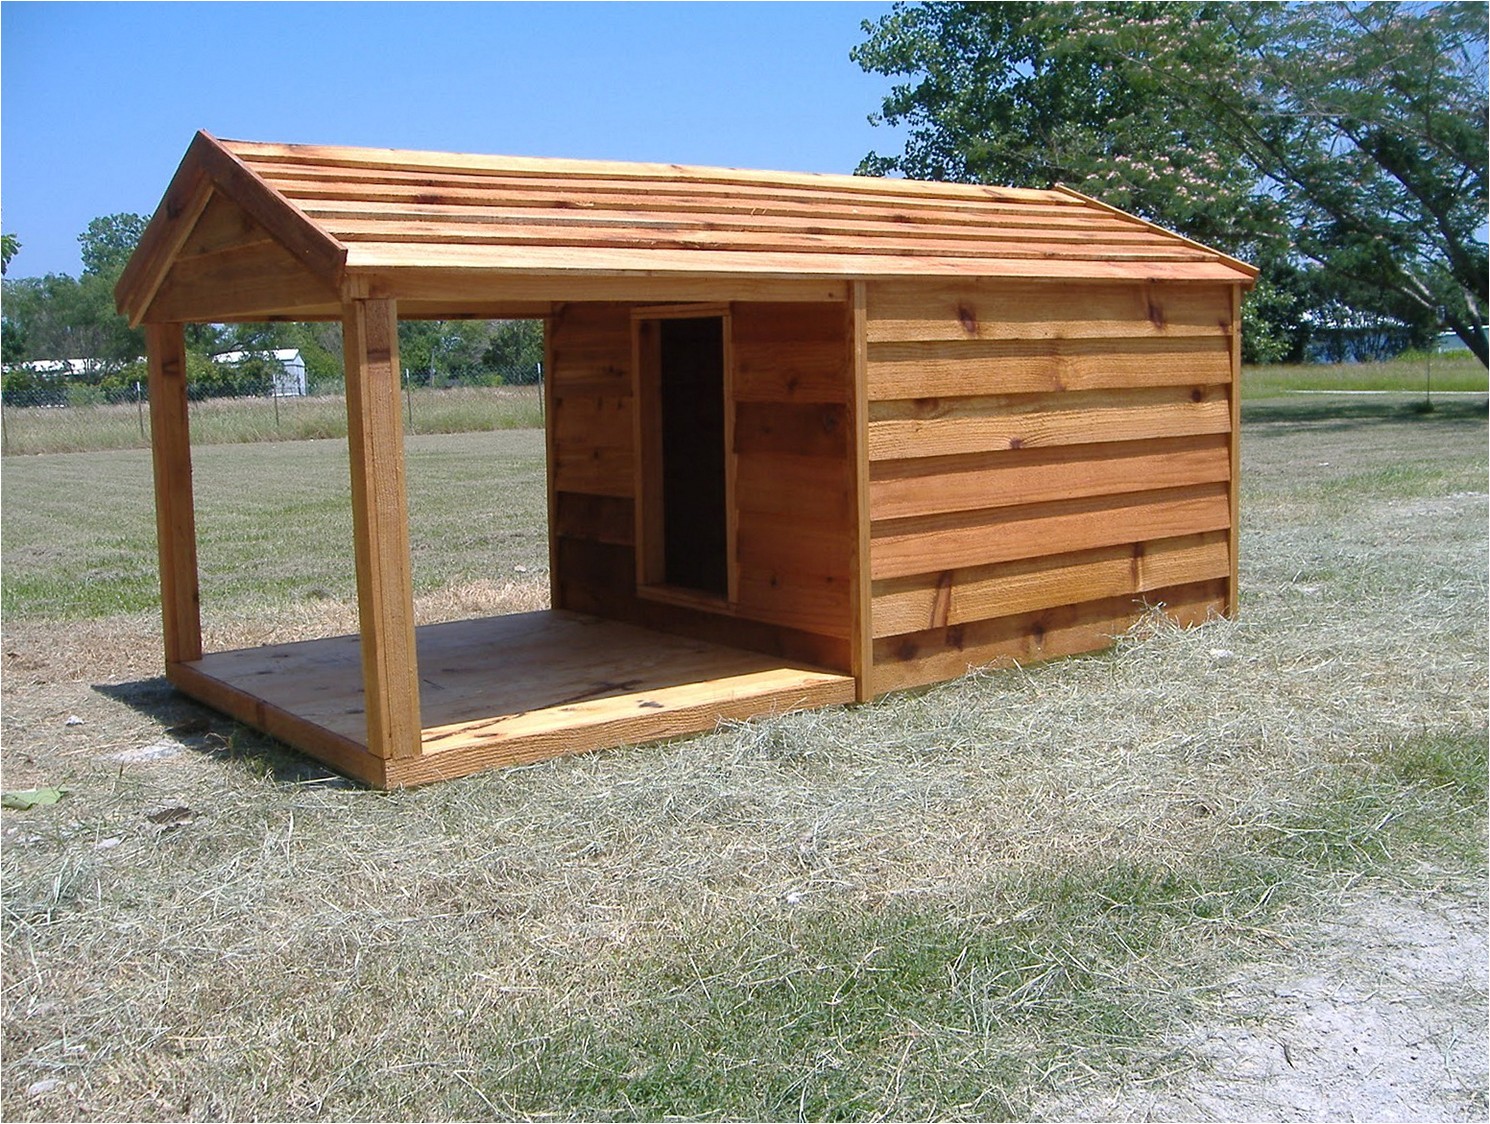 Dog House with Porch Plans Dog House with Porch Plans 17 Best Images About Doggie